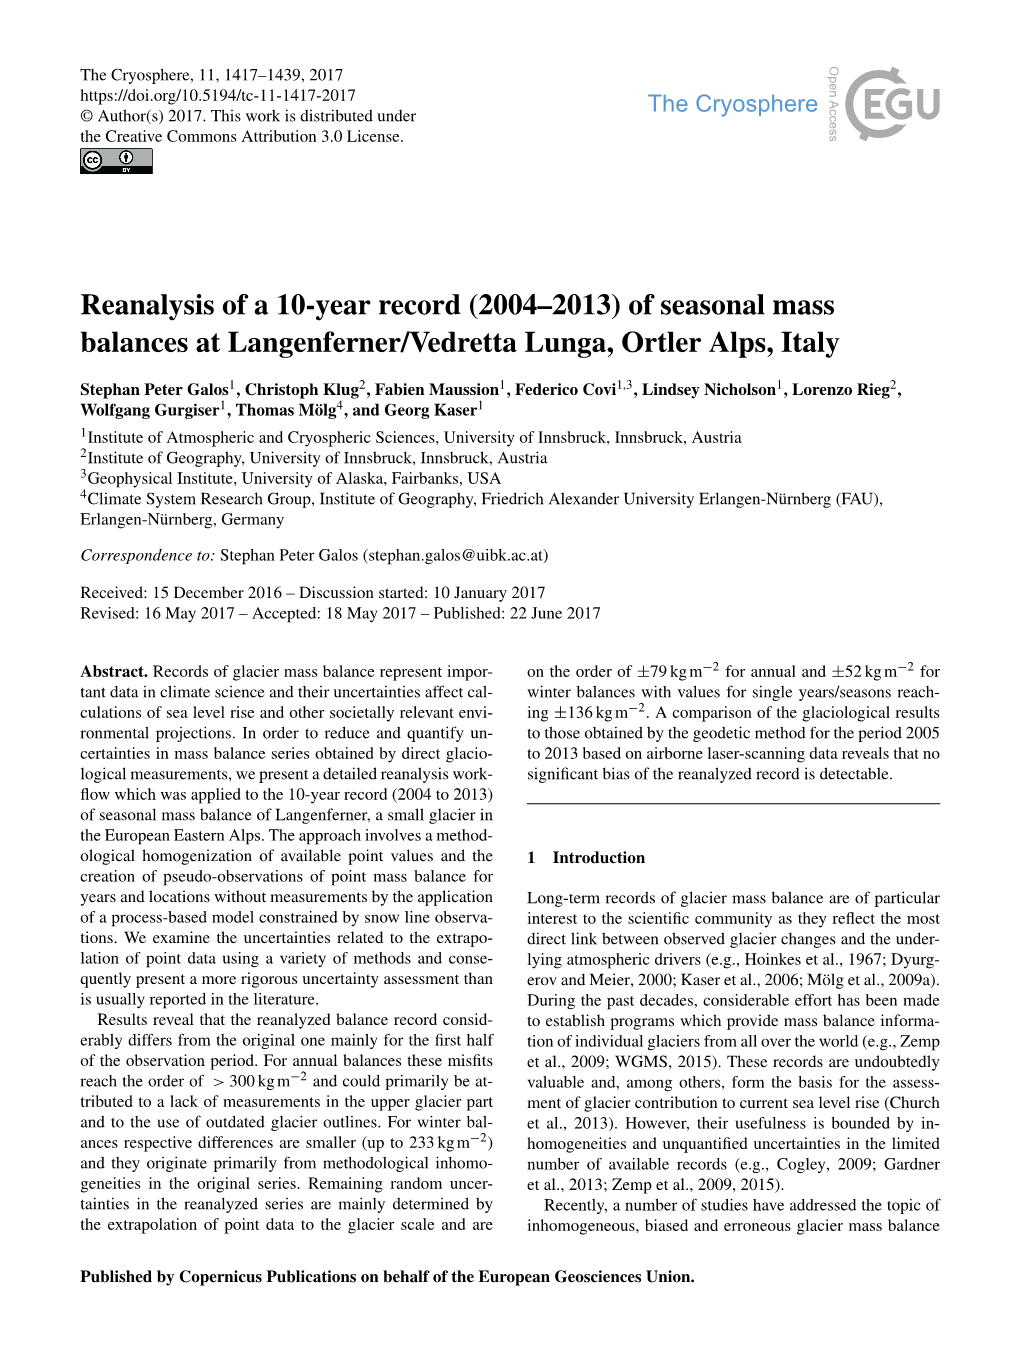 Reanalysis of a 10-Year Record (2004–2013) of Seasonal Mass Balances at Langenferner/Vedretta Lunga, Ortler Alps, Italy